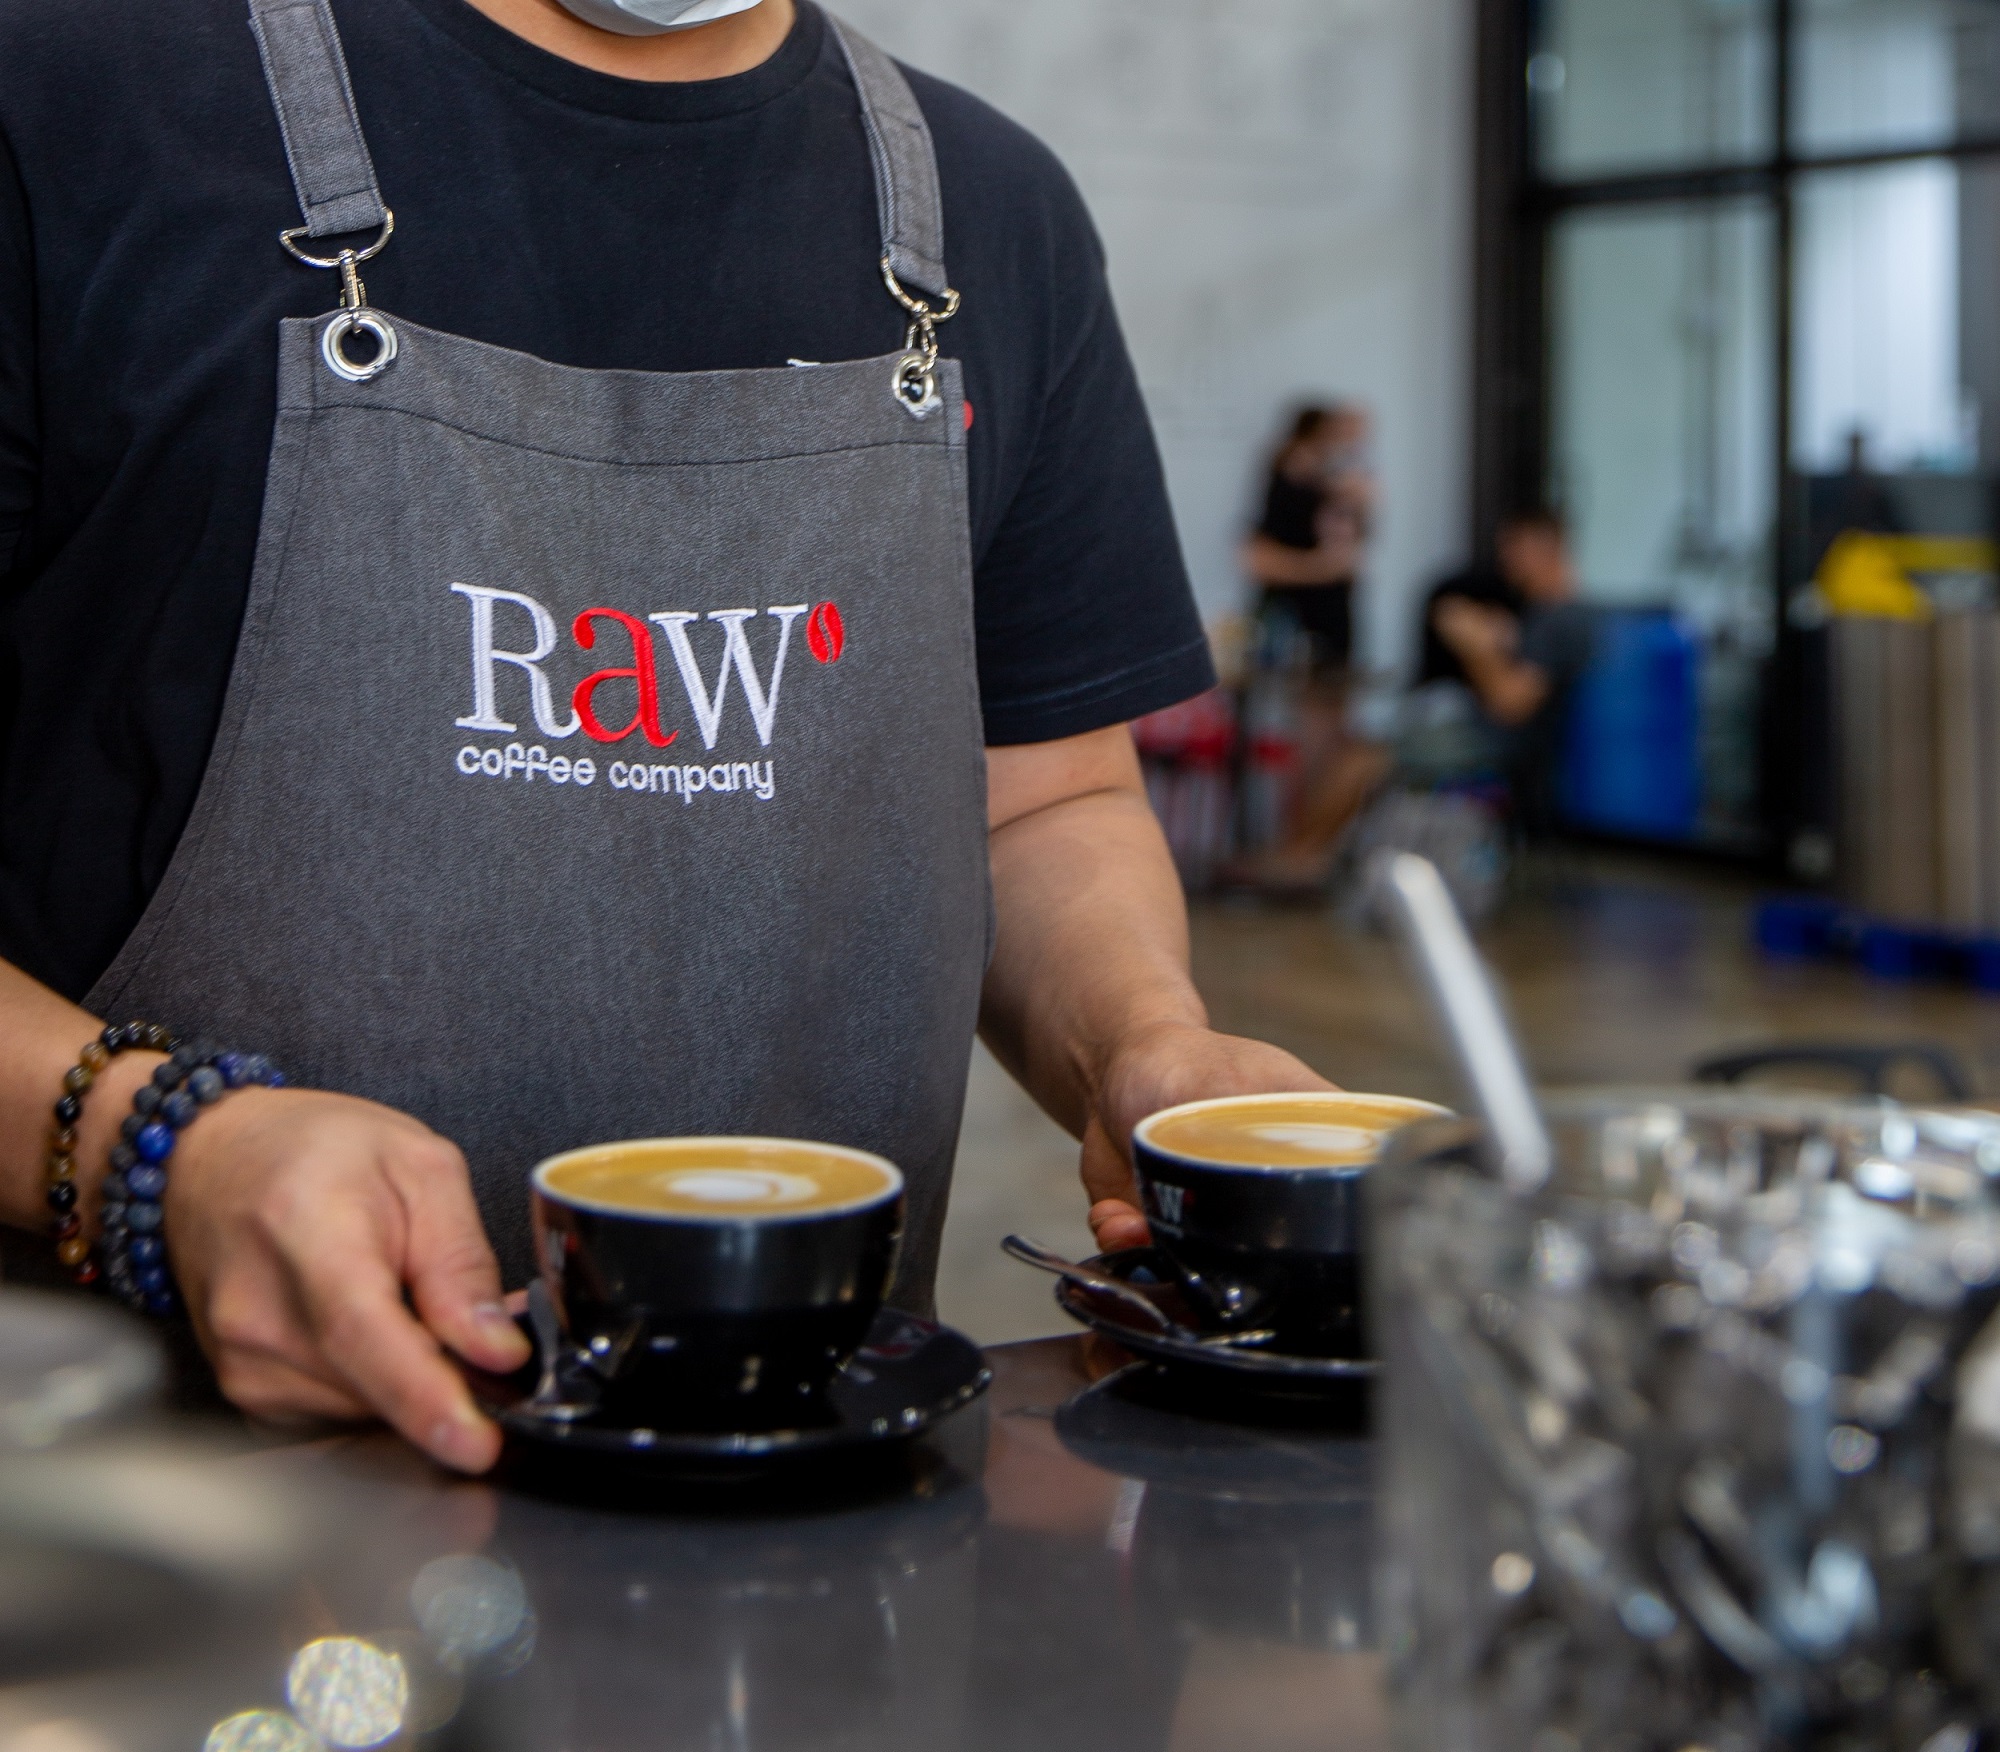 Dubai’s Favourite Cup of Specialty, Ethically Sourced Coffee: RAW Coffee